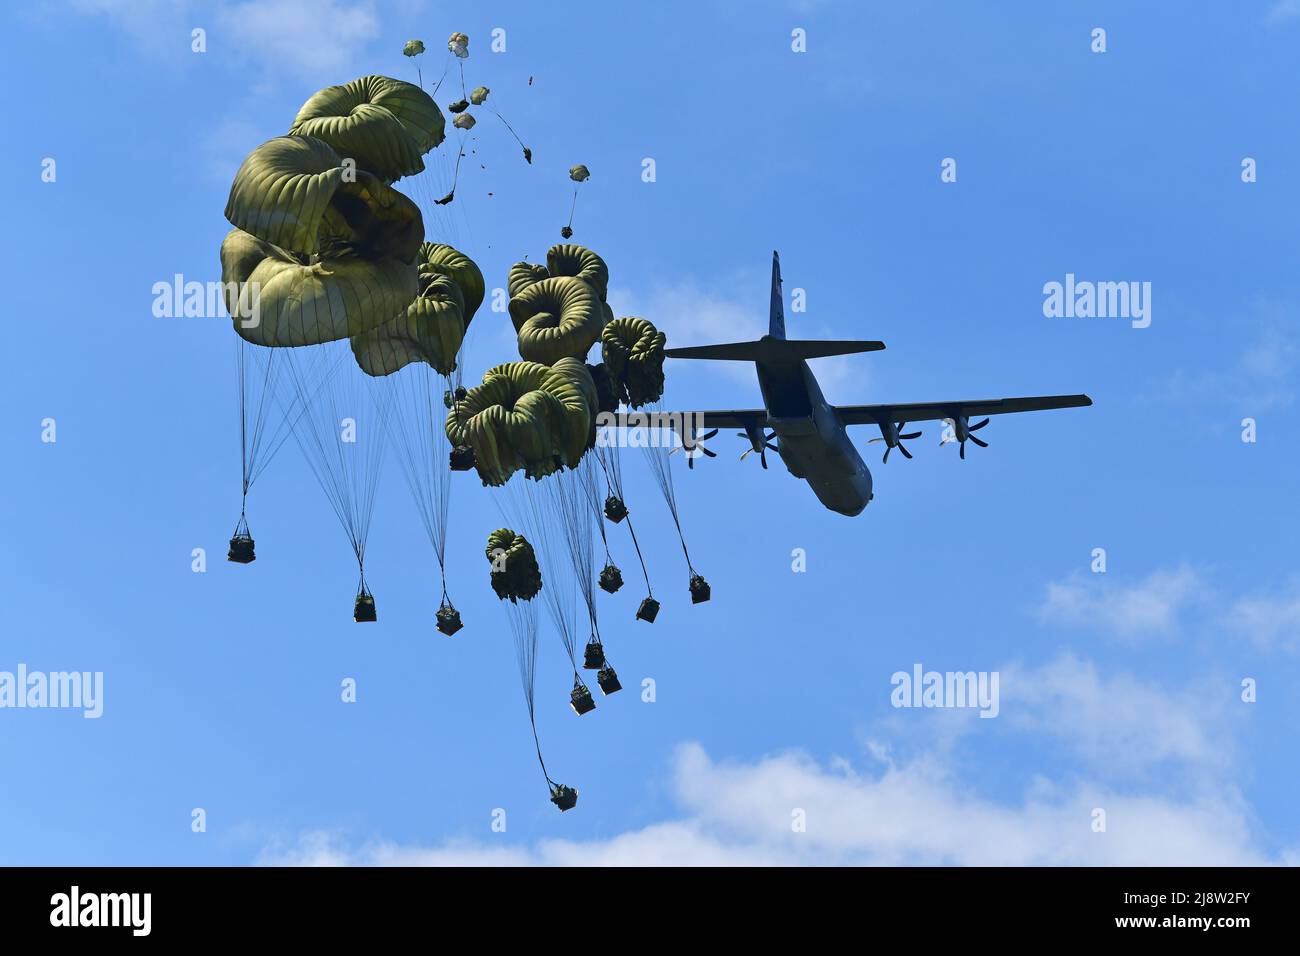 Pordenone, Italy. 17th May, 2022. U.S. Army paratroopers assigned to the Brigade Support Battalion, 173rd Airborne Brigade, conduct an airborne operation from a U.S. Air Force 86th Air Wing C-130 Hercules aircraft onto Juliet Drop Zone, May 17, 2022 in Pordenone, Italy. Credit: Paolo Bovo/U.S. Army/Alamy Live News Stock Photo